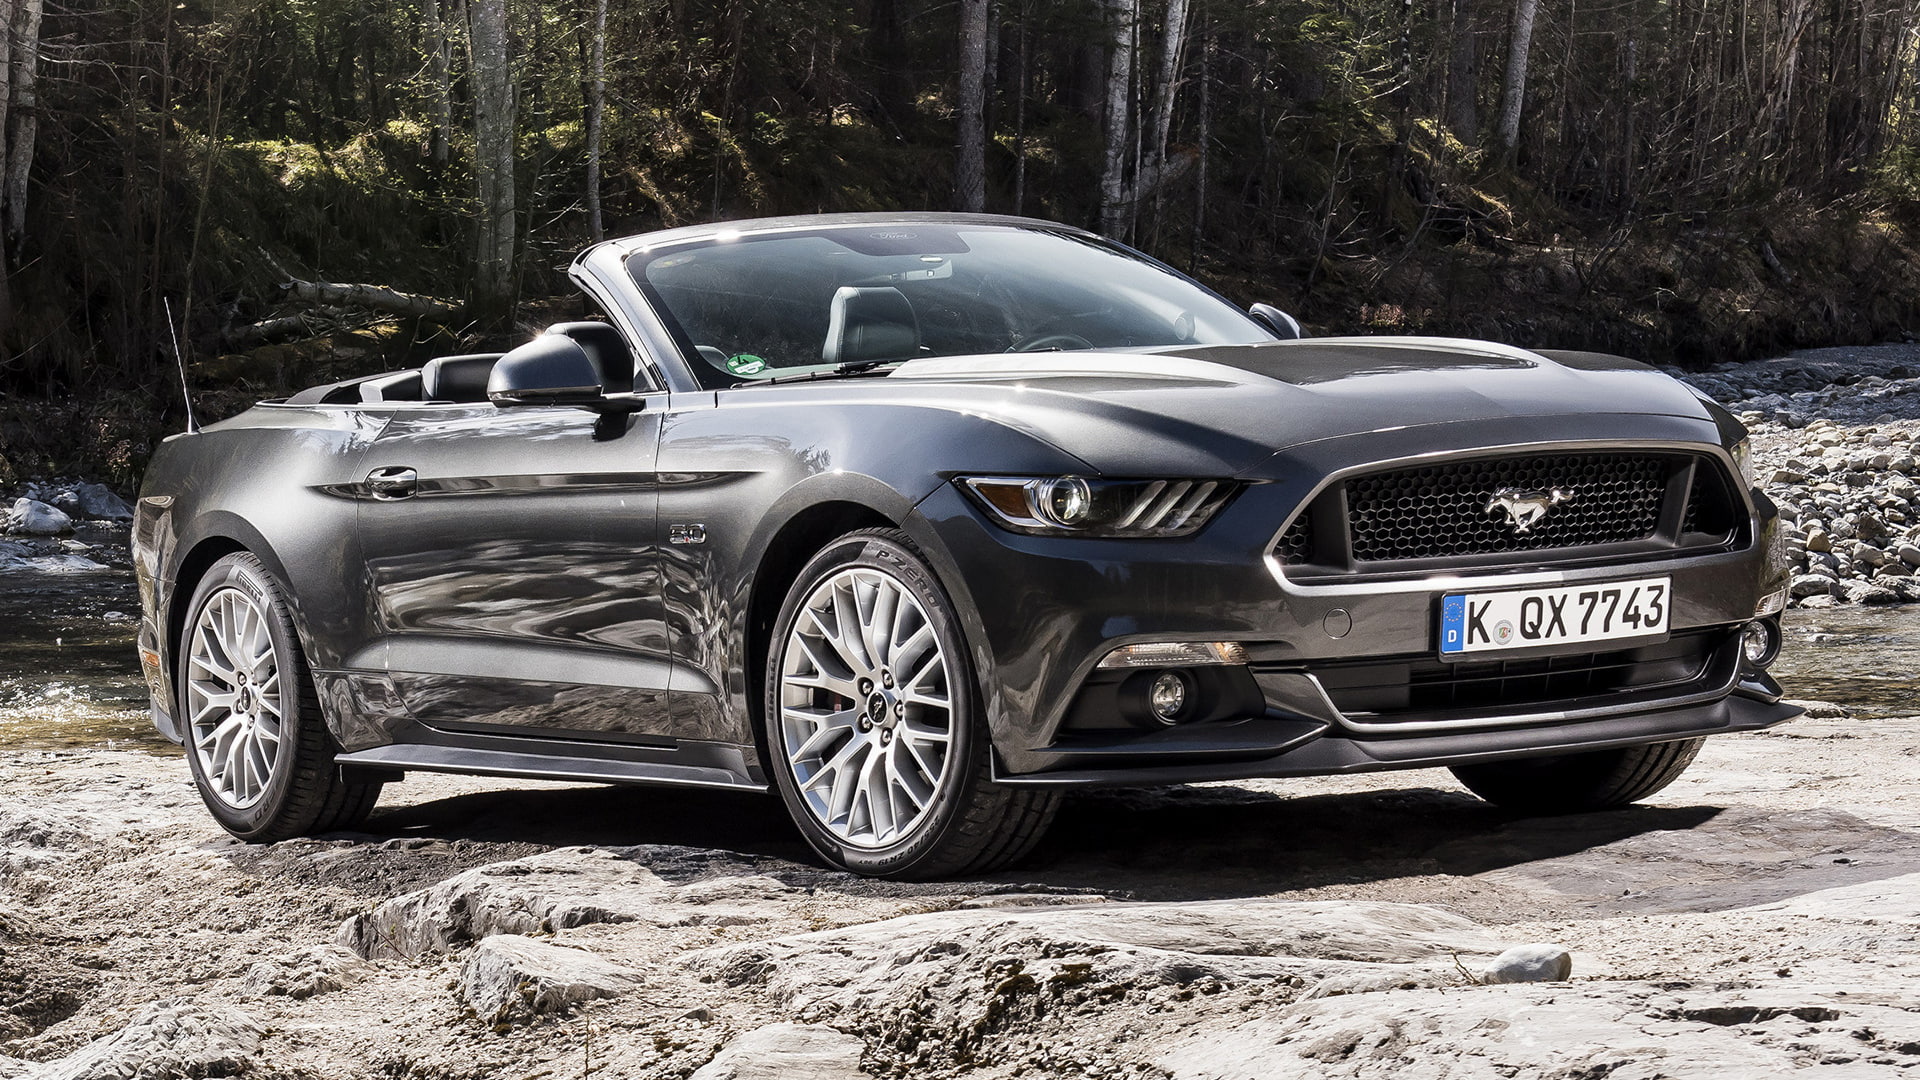 Ford, Ford Mustang GT, Car, Convertible, Muscle Car, Silver Car